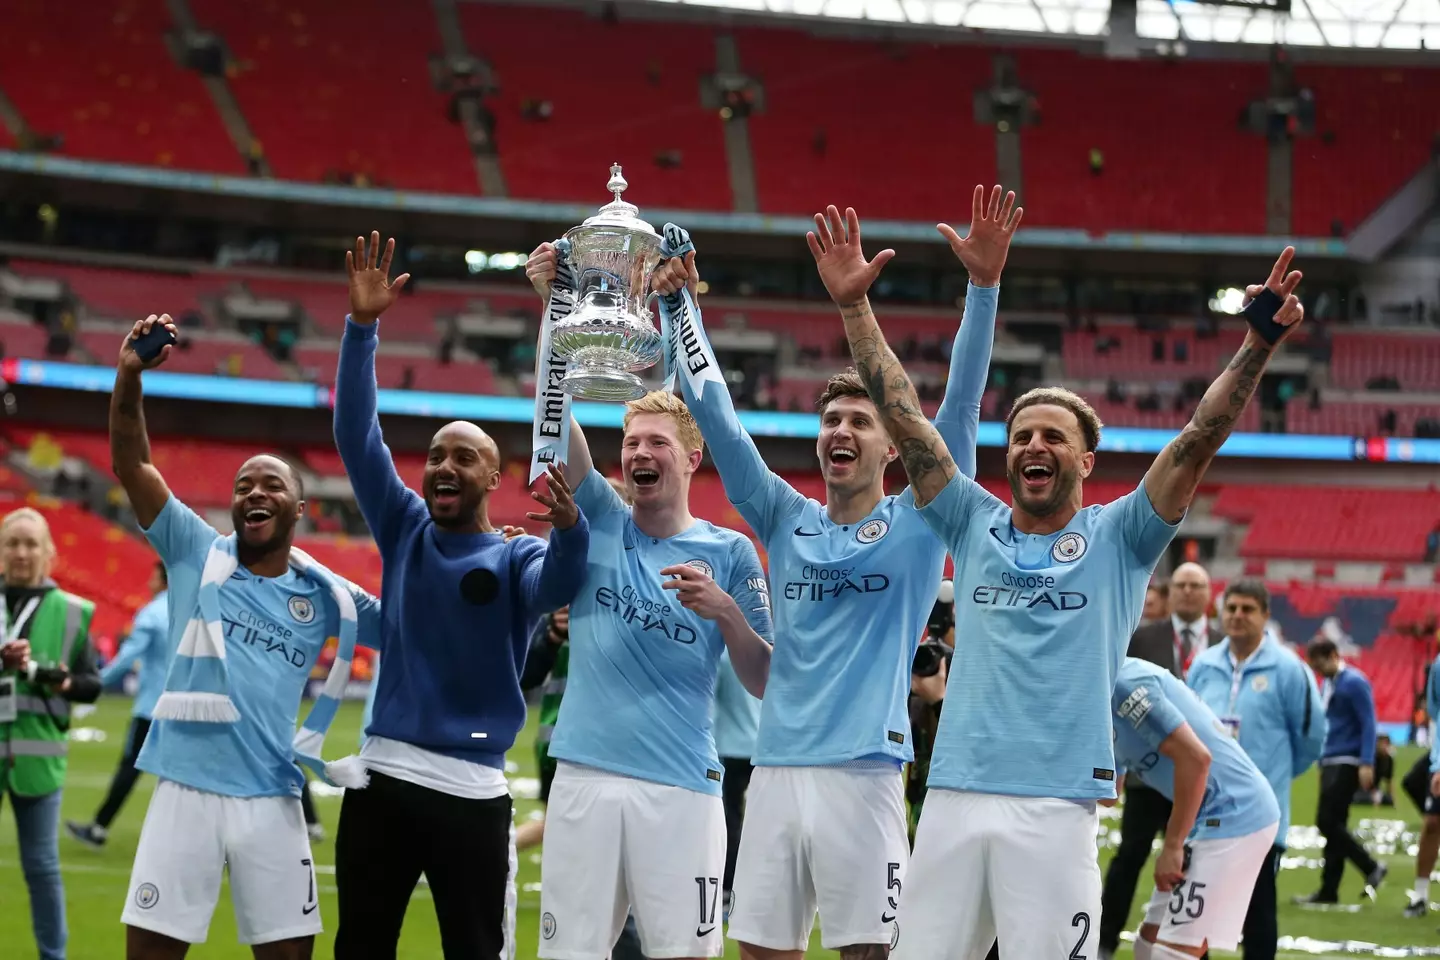 Manchester City's FA Cup win. (Andrew Orchard sports photography / Alamy)